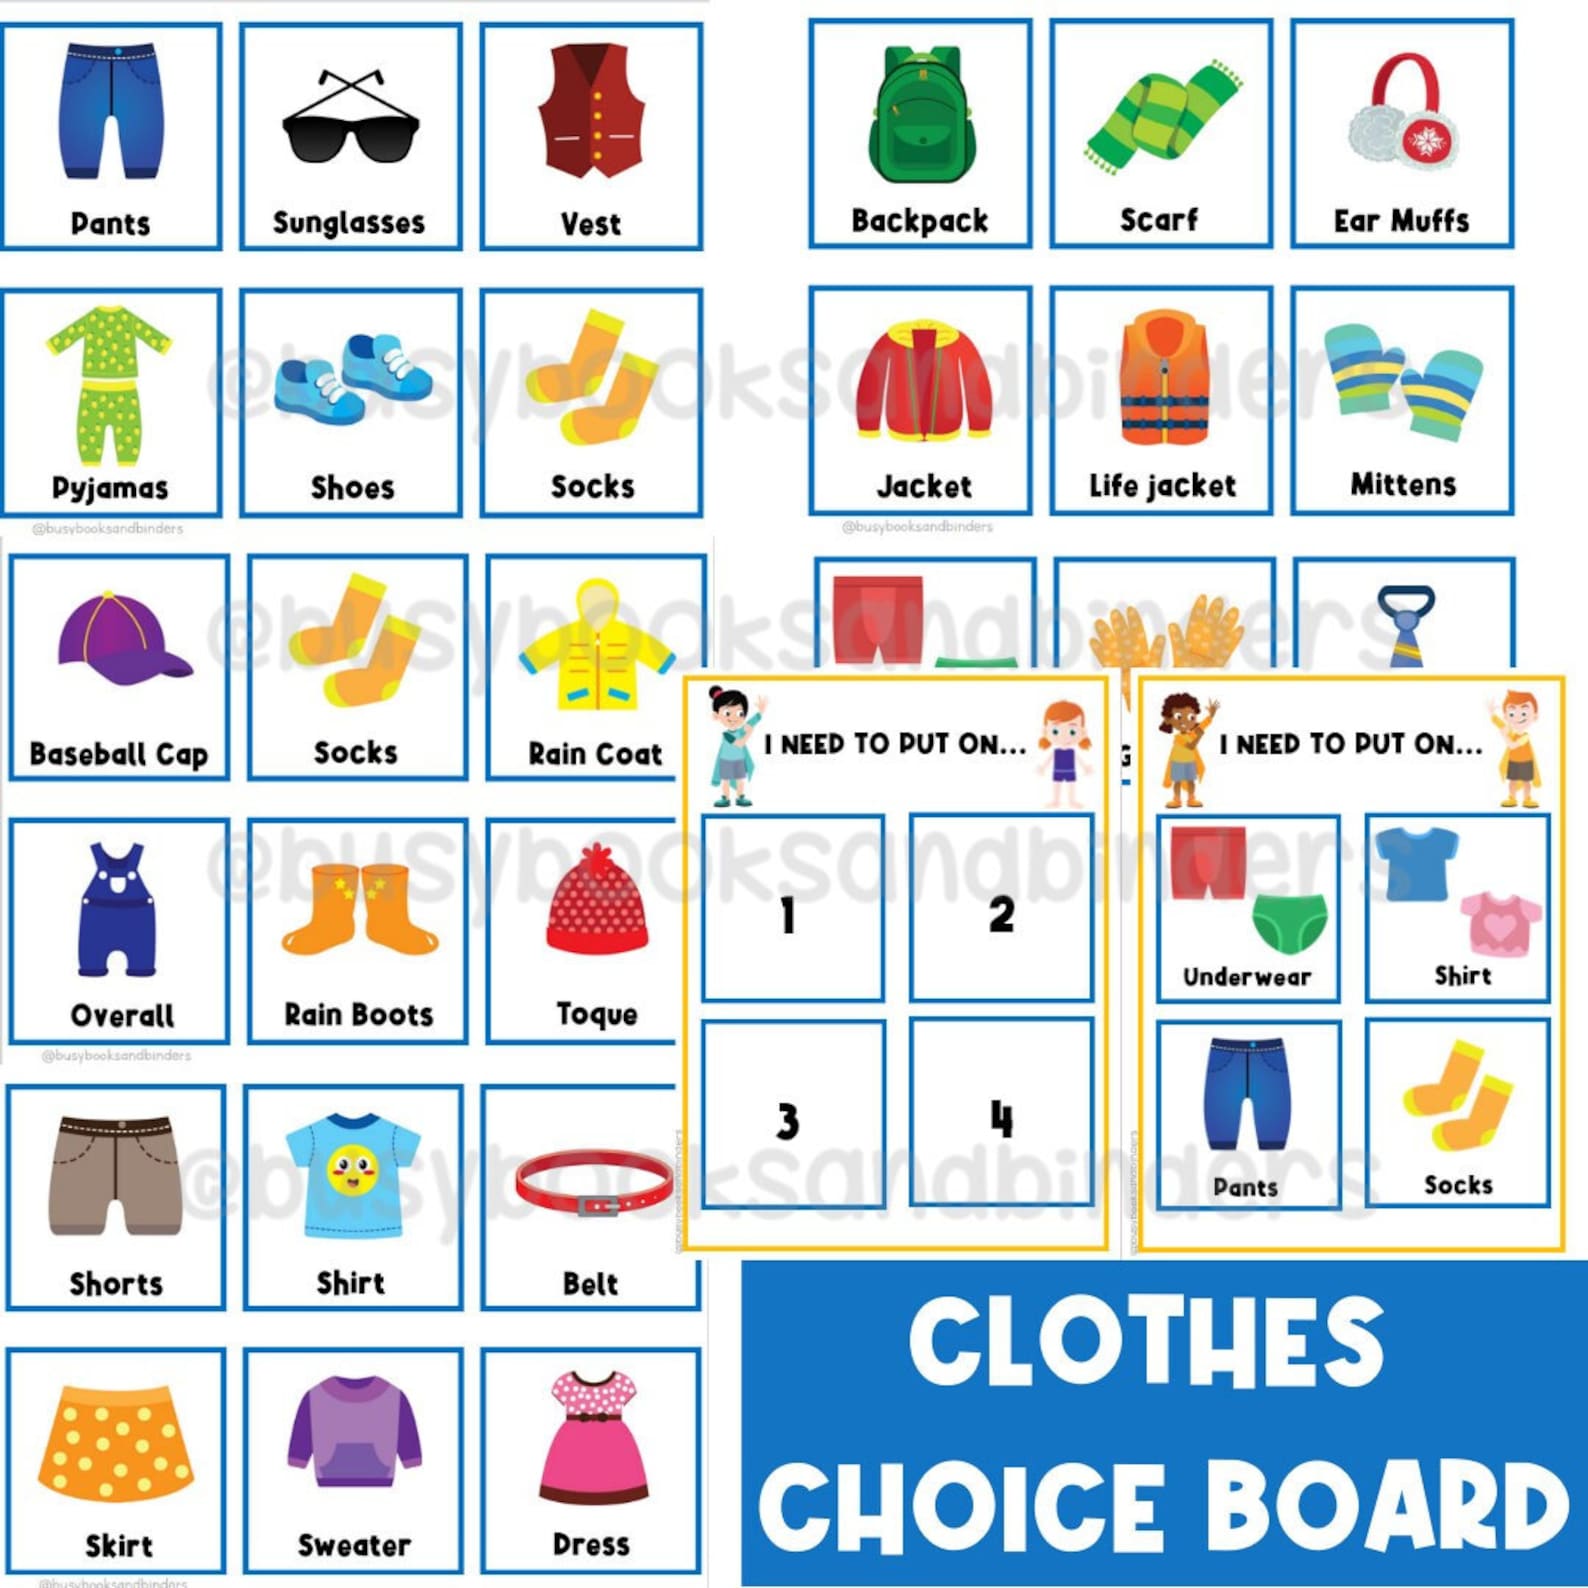 Clothes Choice Board Clothing PECS Visual Aid Schedule - Etsy